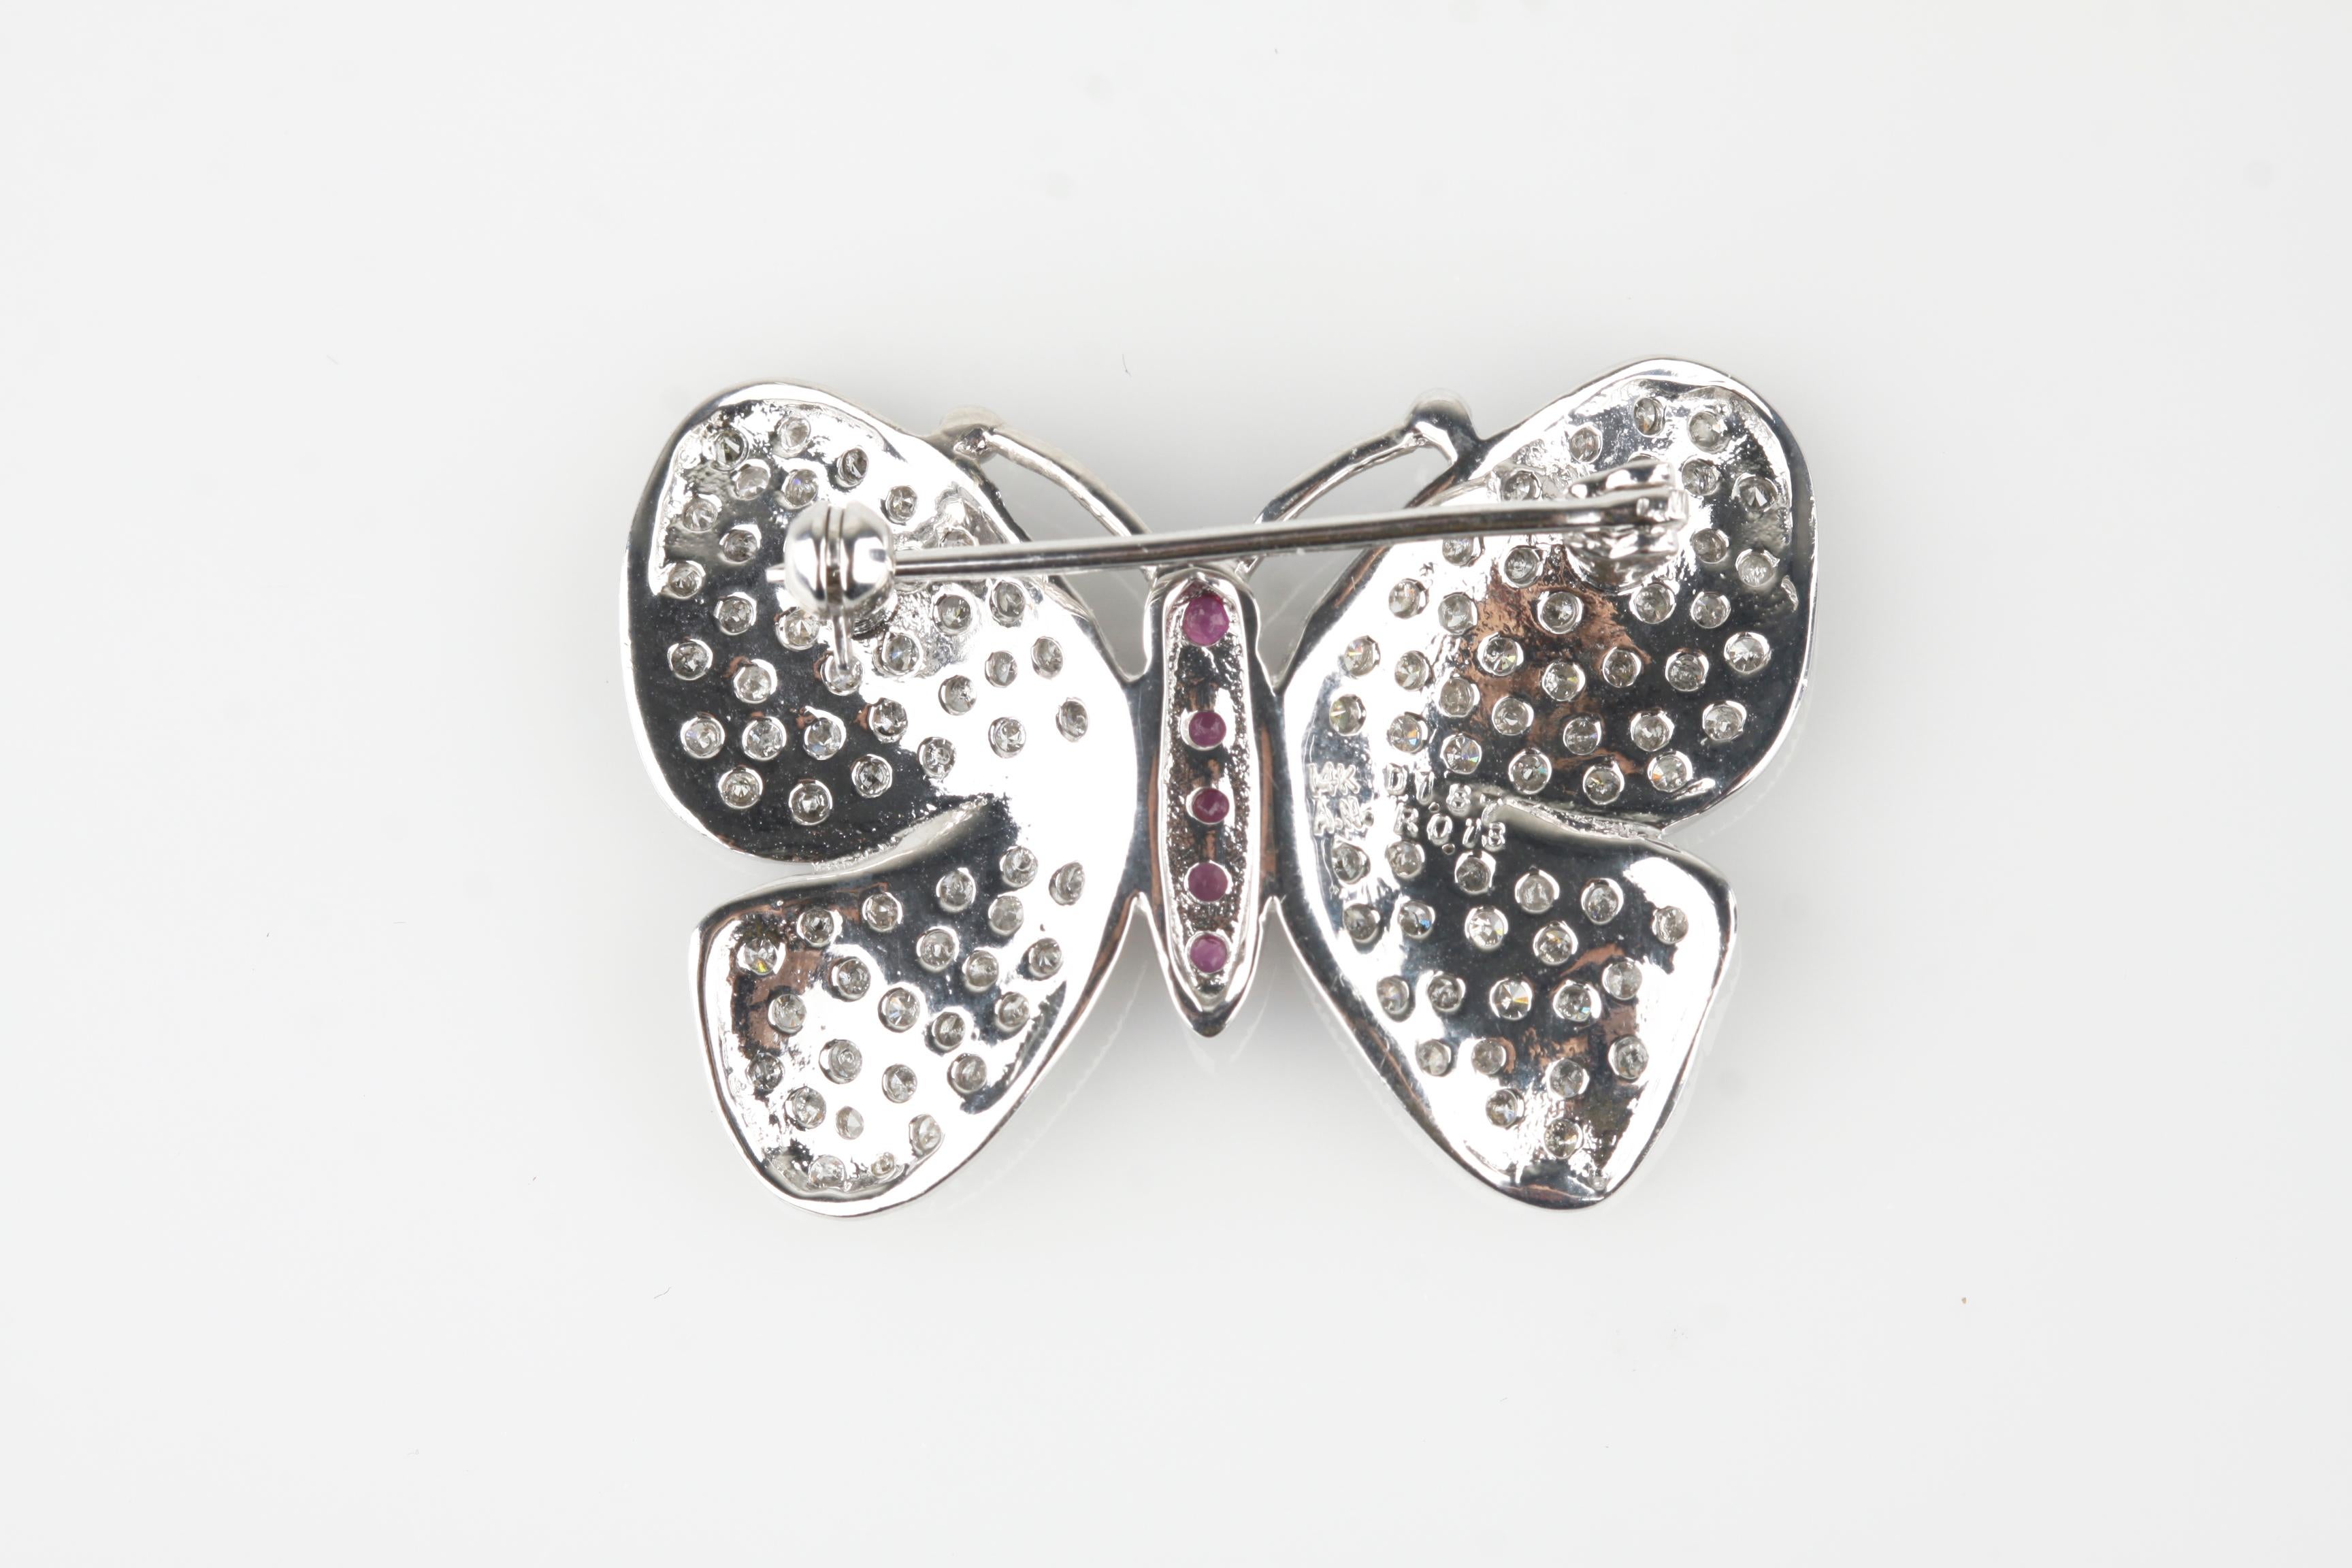 Modern 14k White Gold Butterfly Pave 1.87 Carat Diamond Brooch with Ruby Accents For Sale